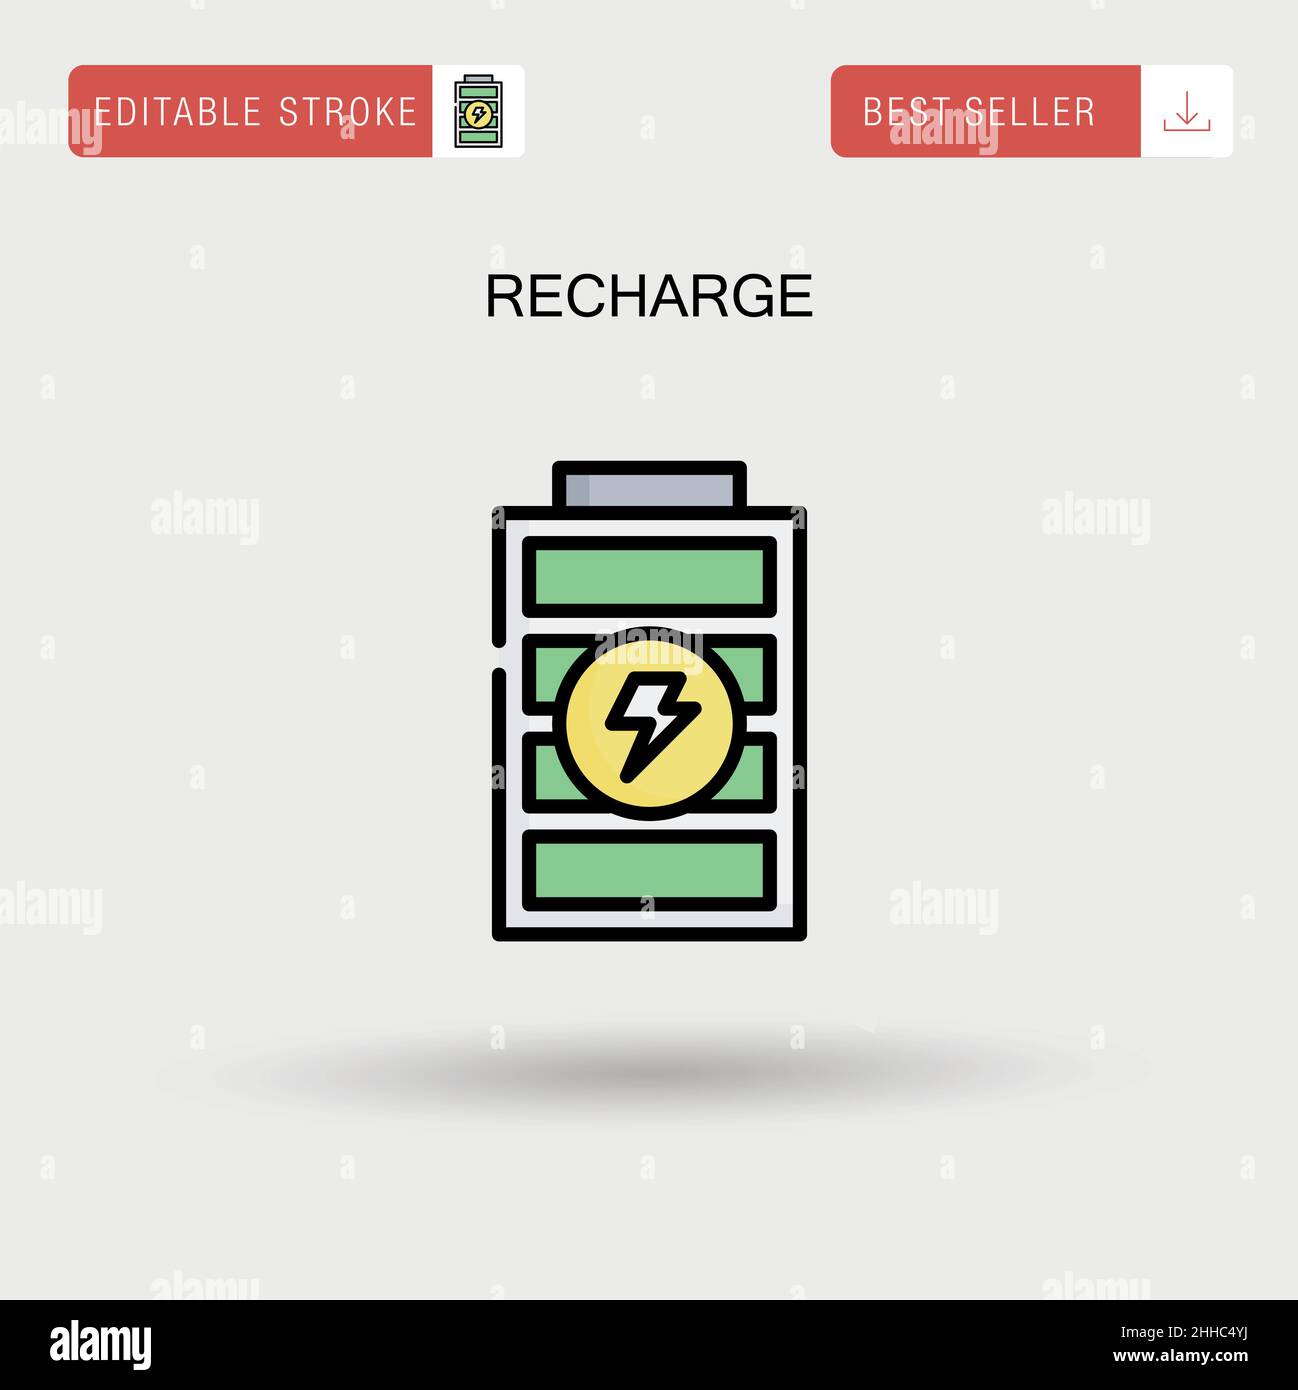 Recharge Simple vector icon. Stock Vector